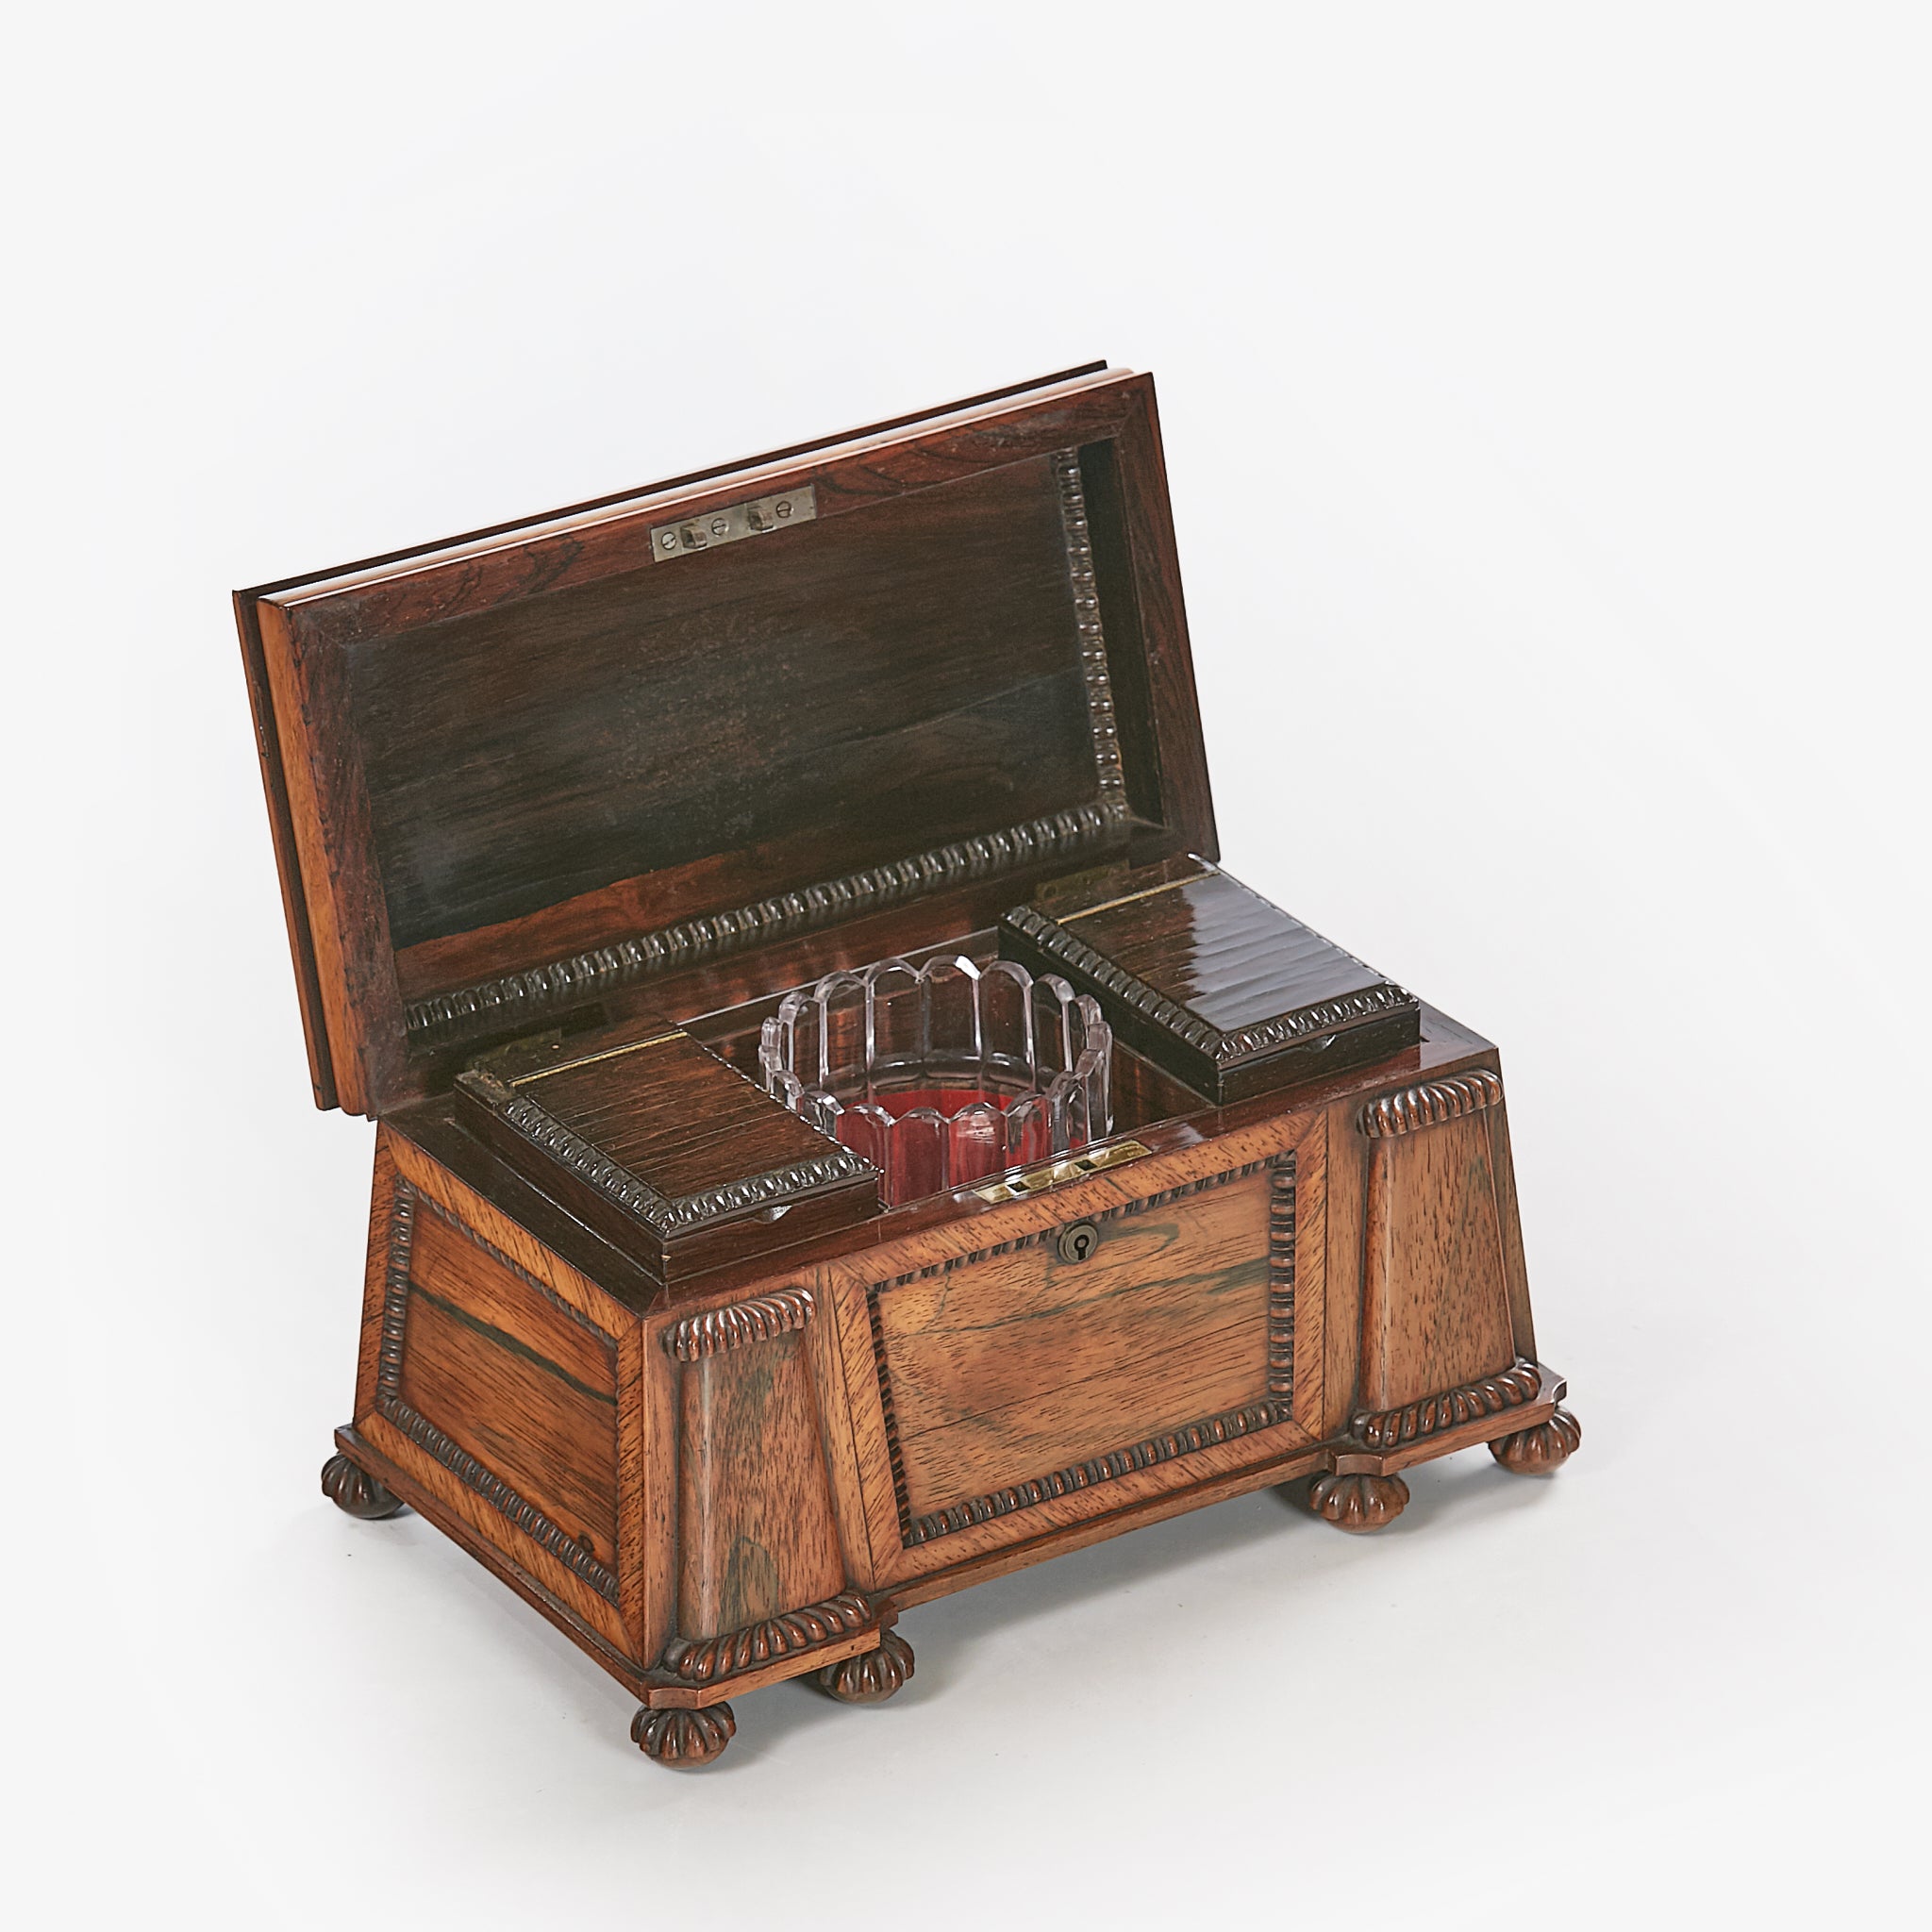 AN EXCEPTIONAL REGENCY TEA CADDY BY GILLOWS OF LANCASTER - REF No. 178